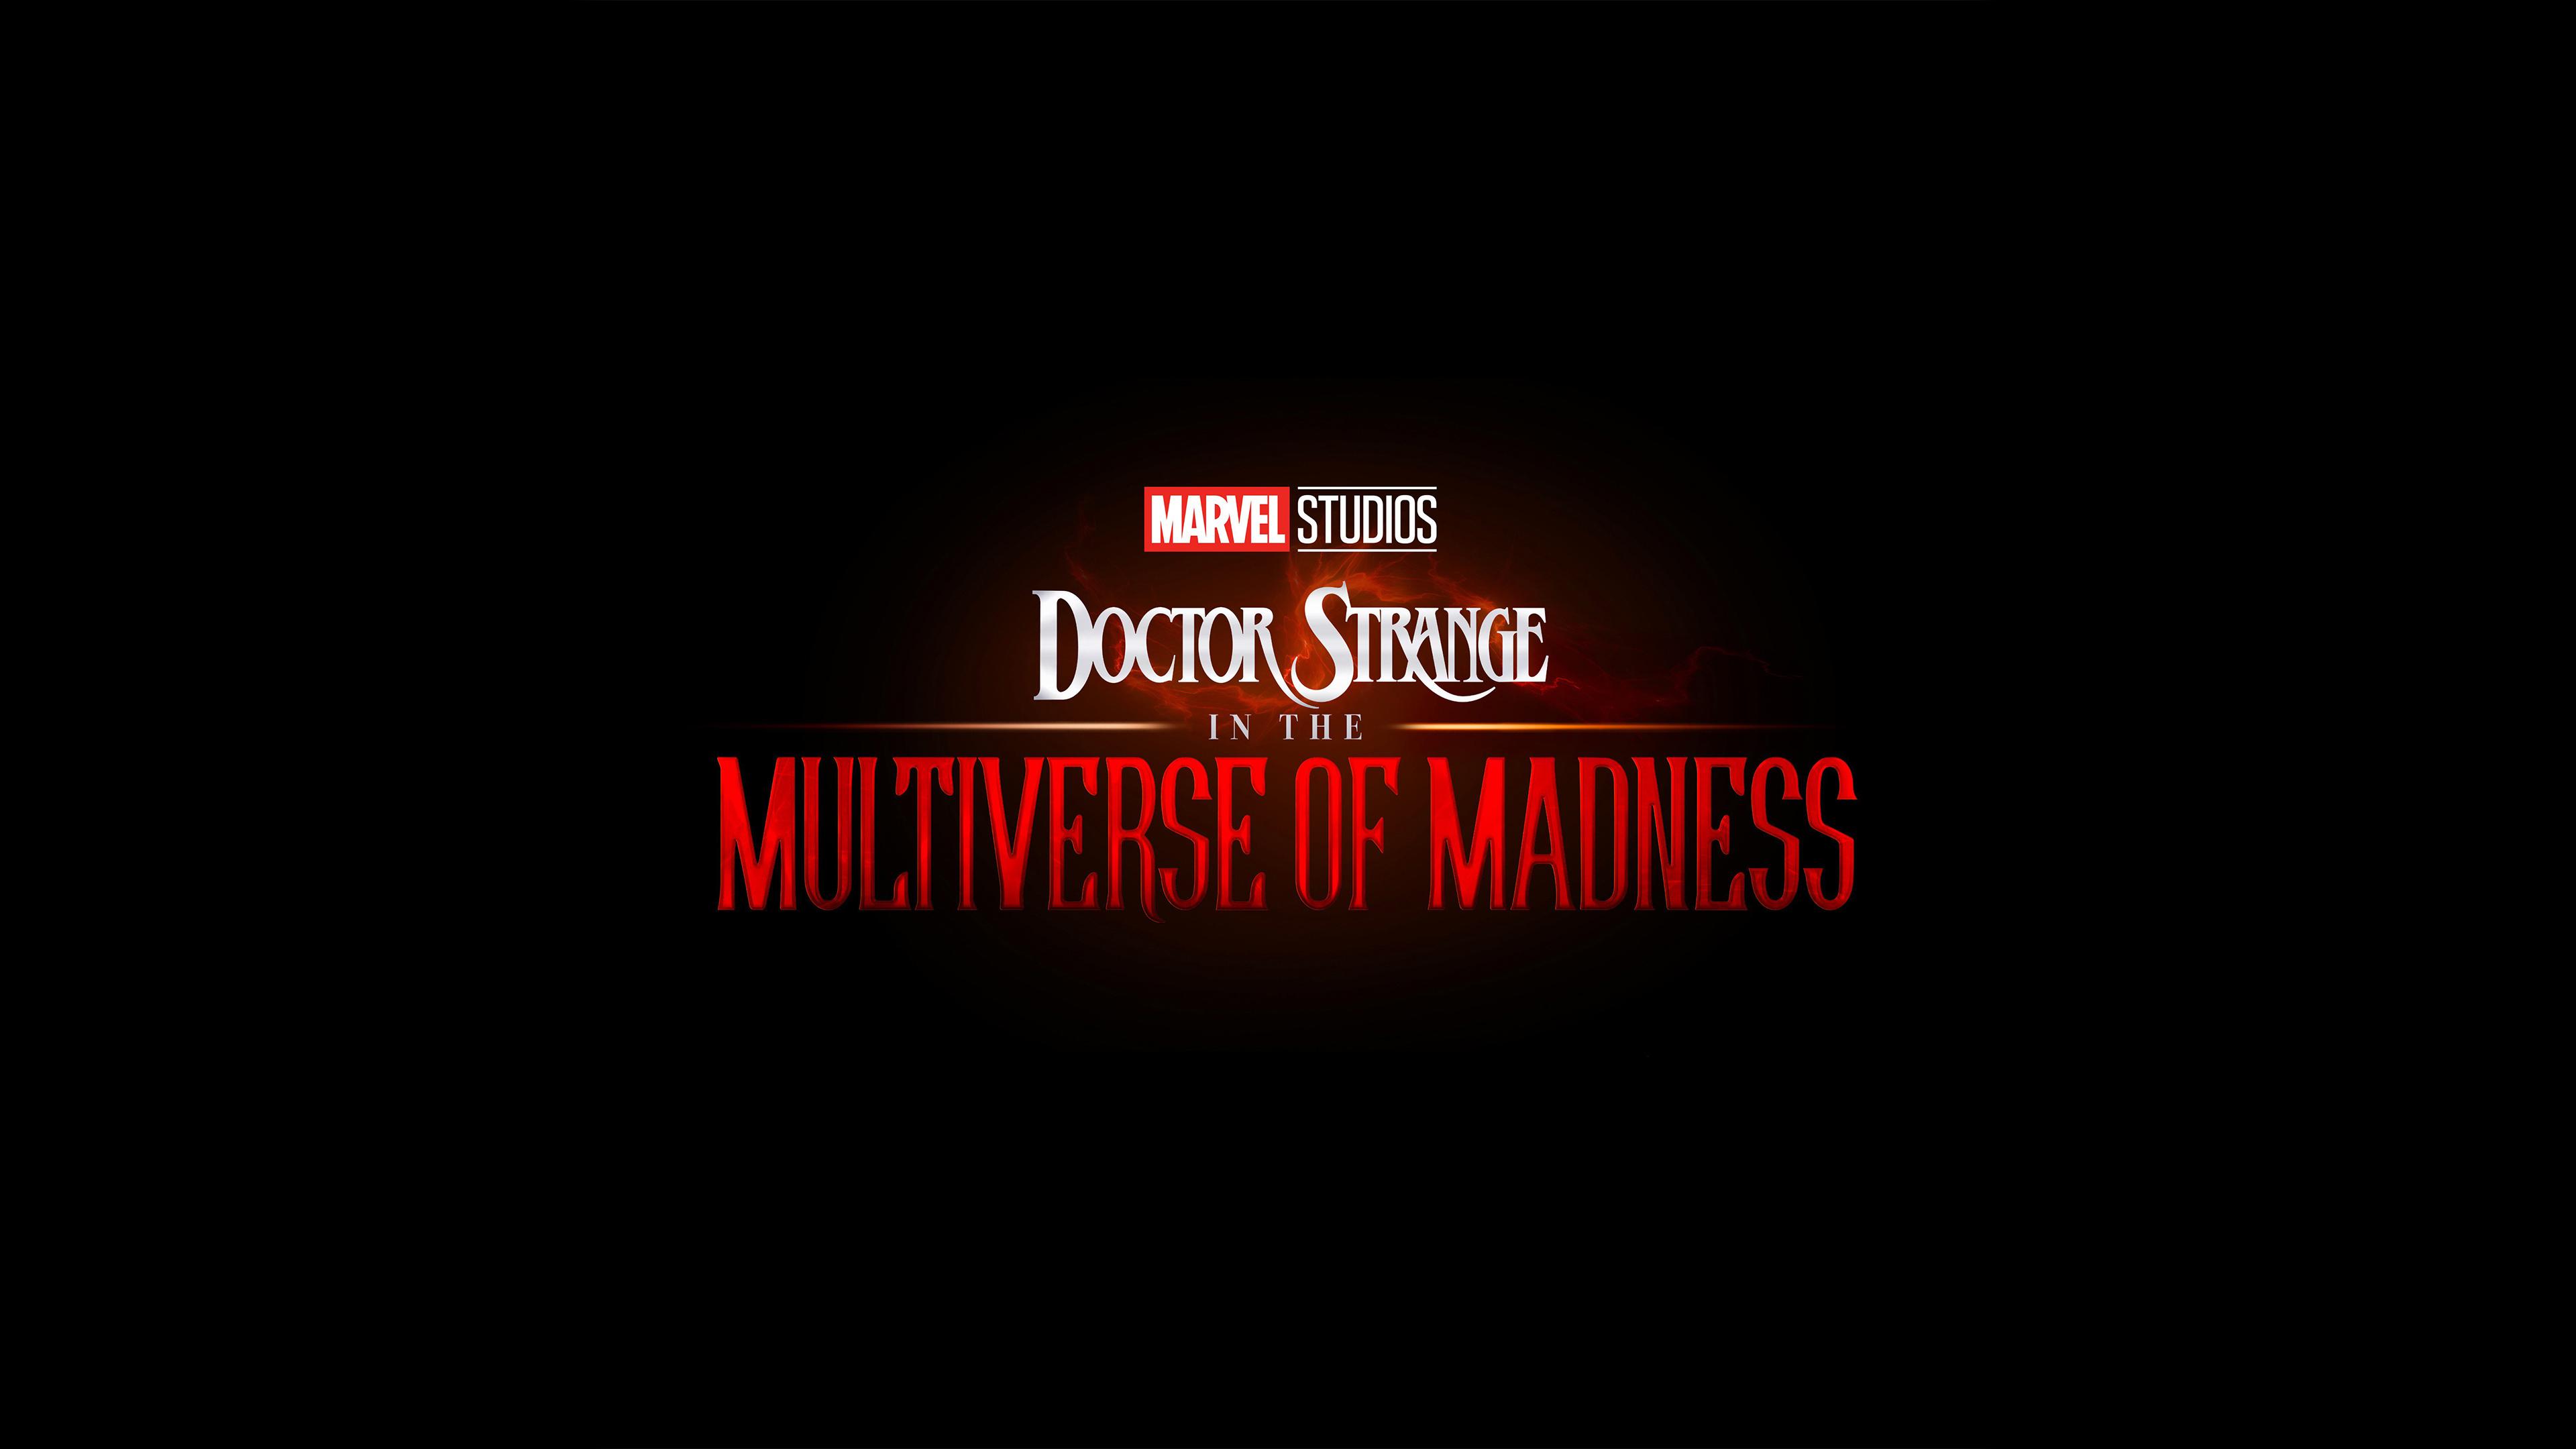 Doctor Strange in the Multiverse of Madness 4k Ultra HD Wallpapers